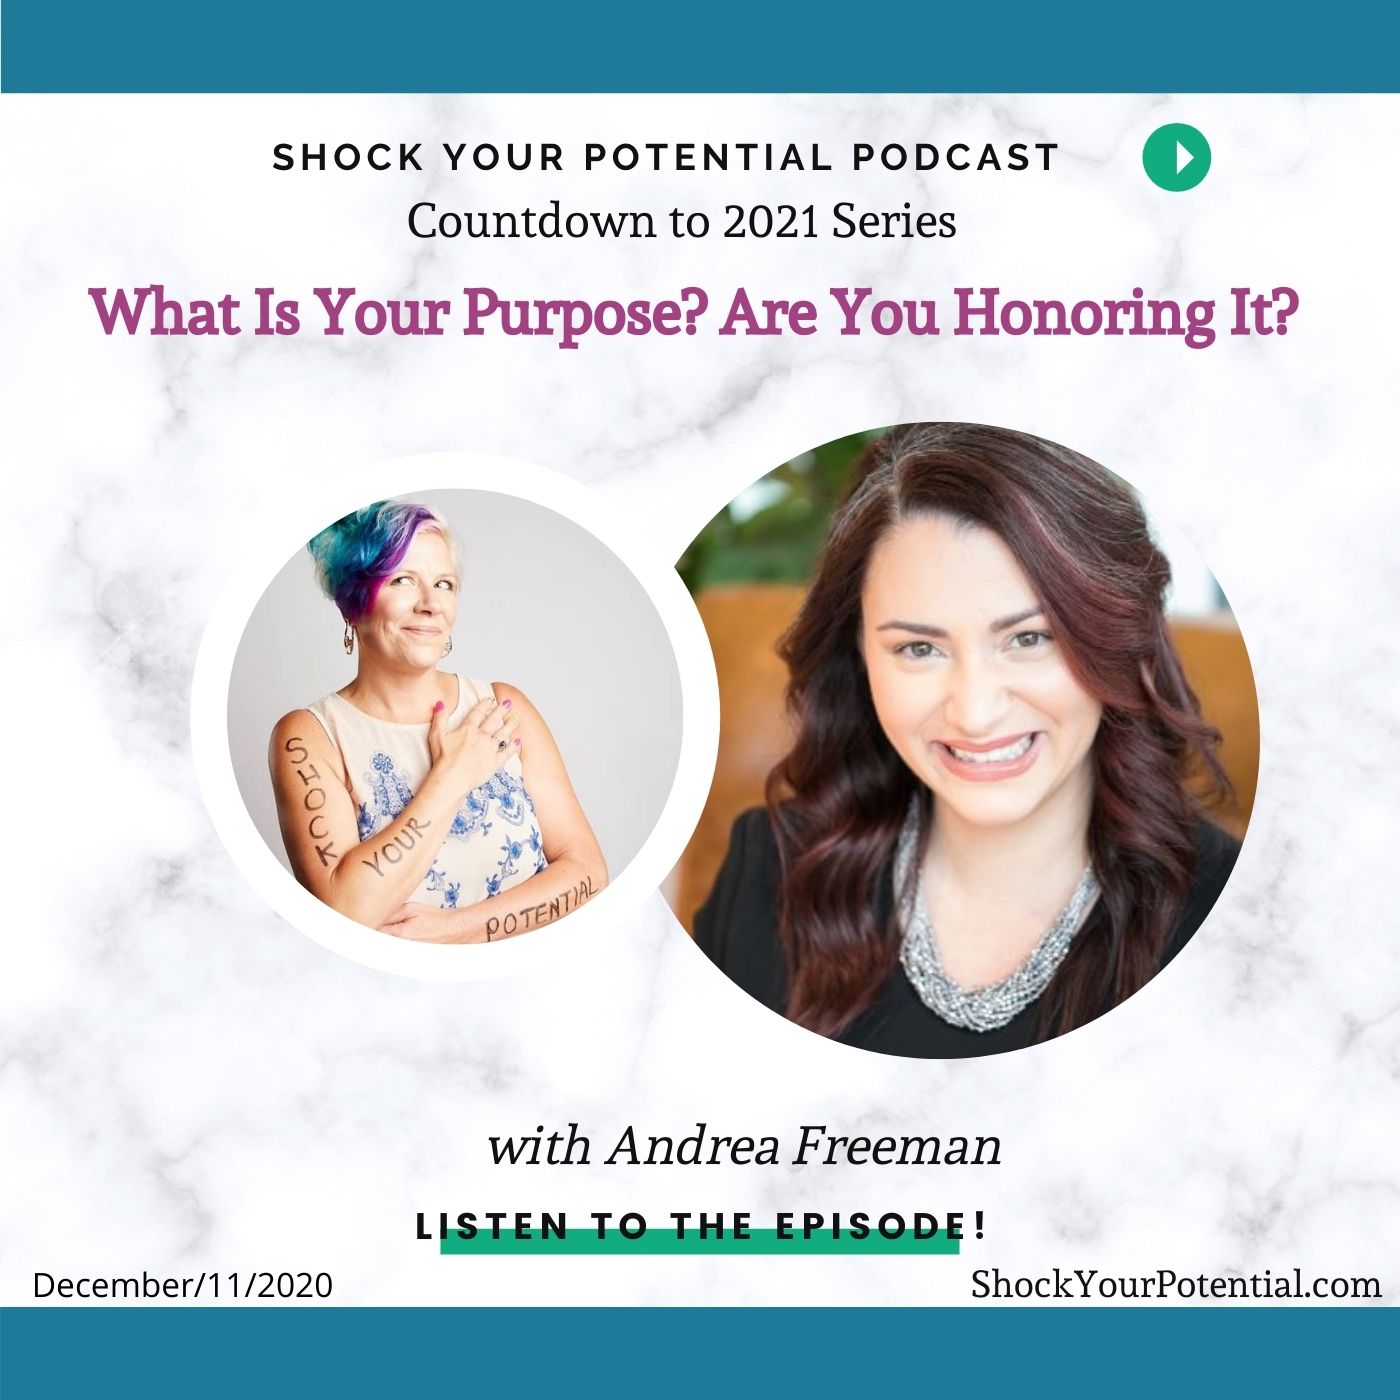 What Is Your Purpose? Are You Honoring It? – Andrea Freeman